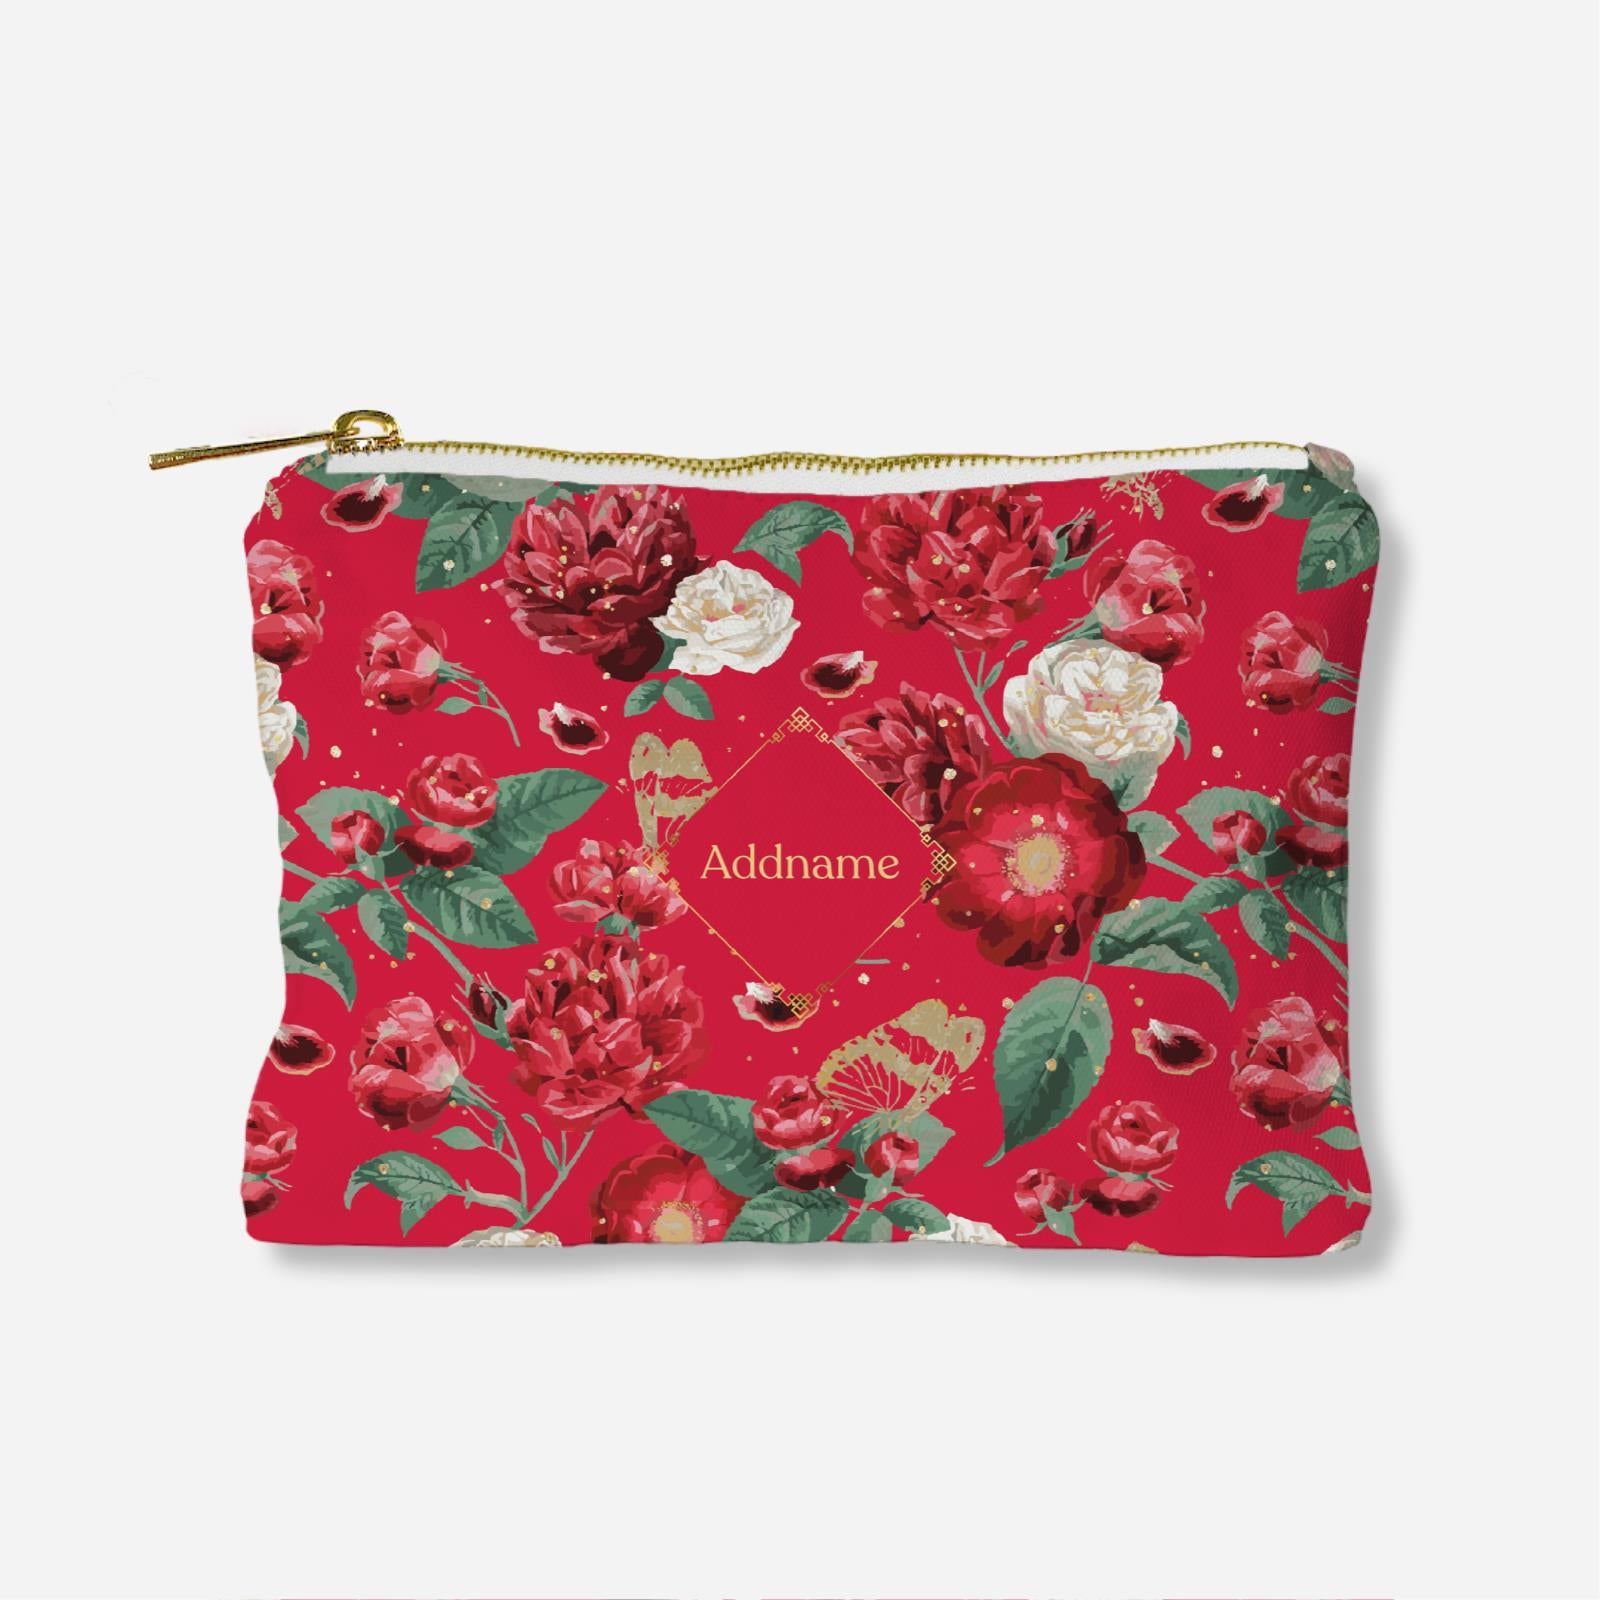 Royal Floral Series - Scorching Passion Full Print Zipper Pouch With English Personalization